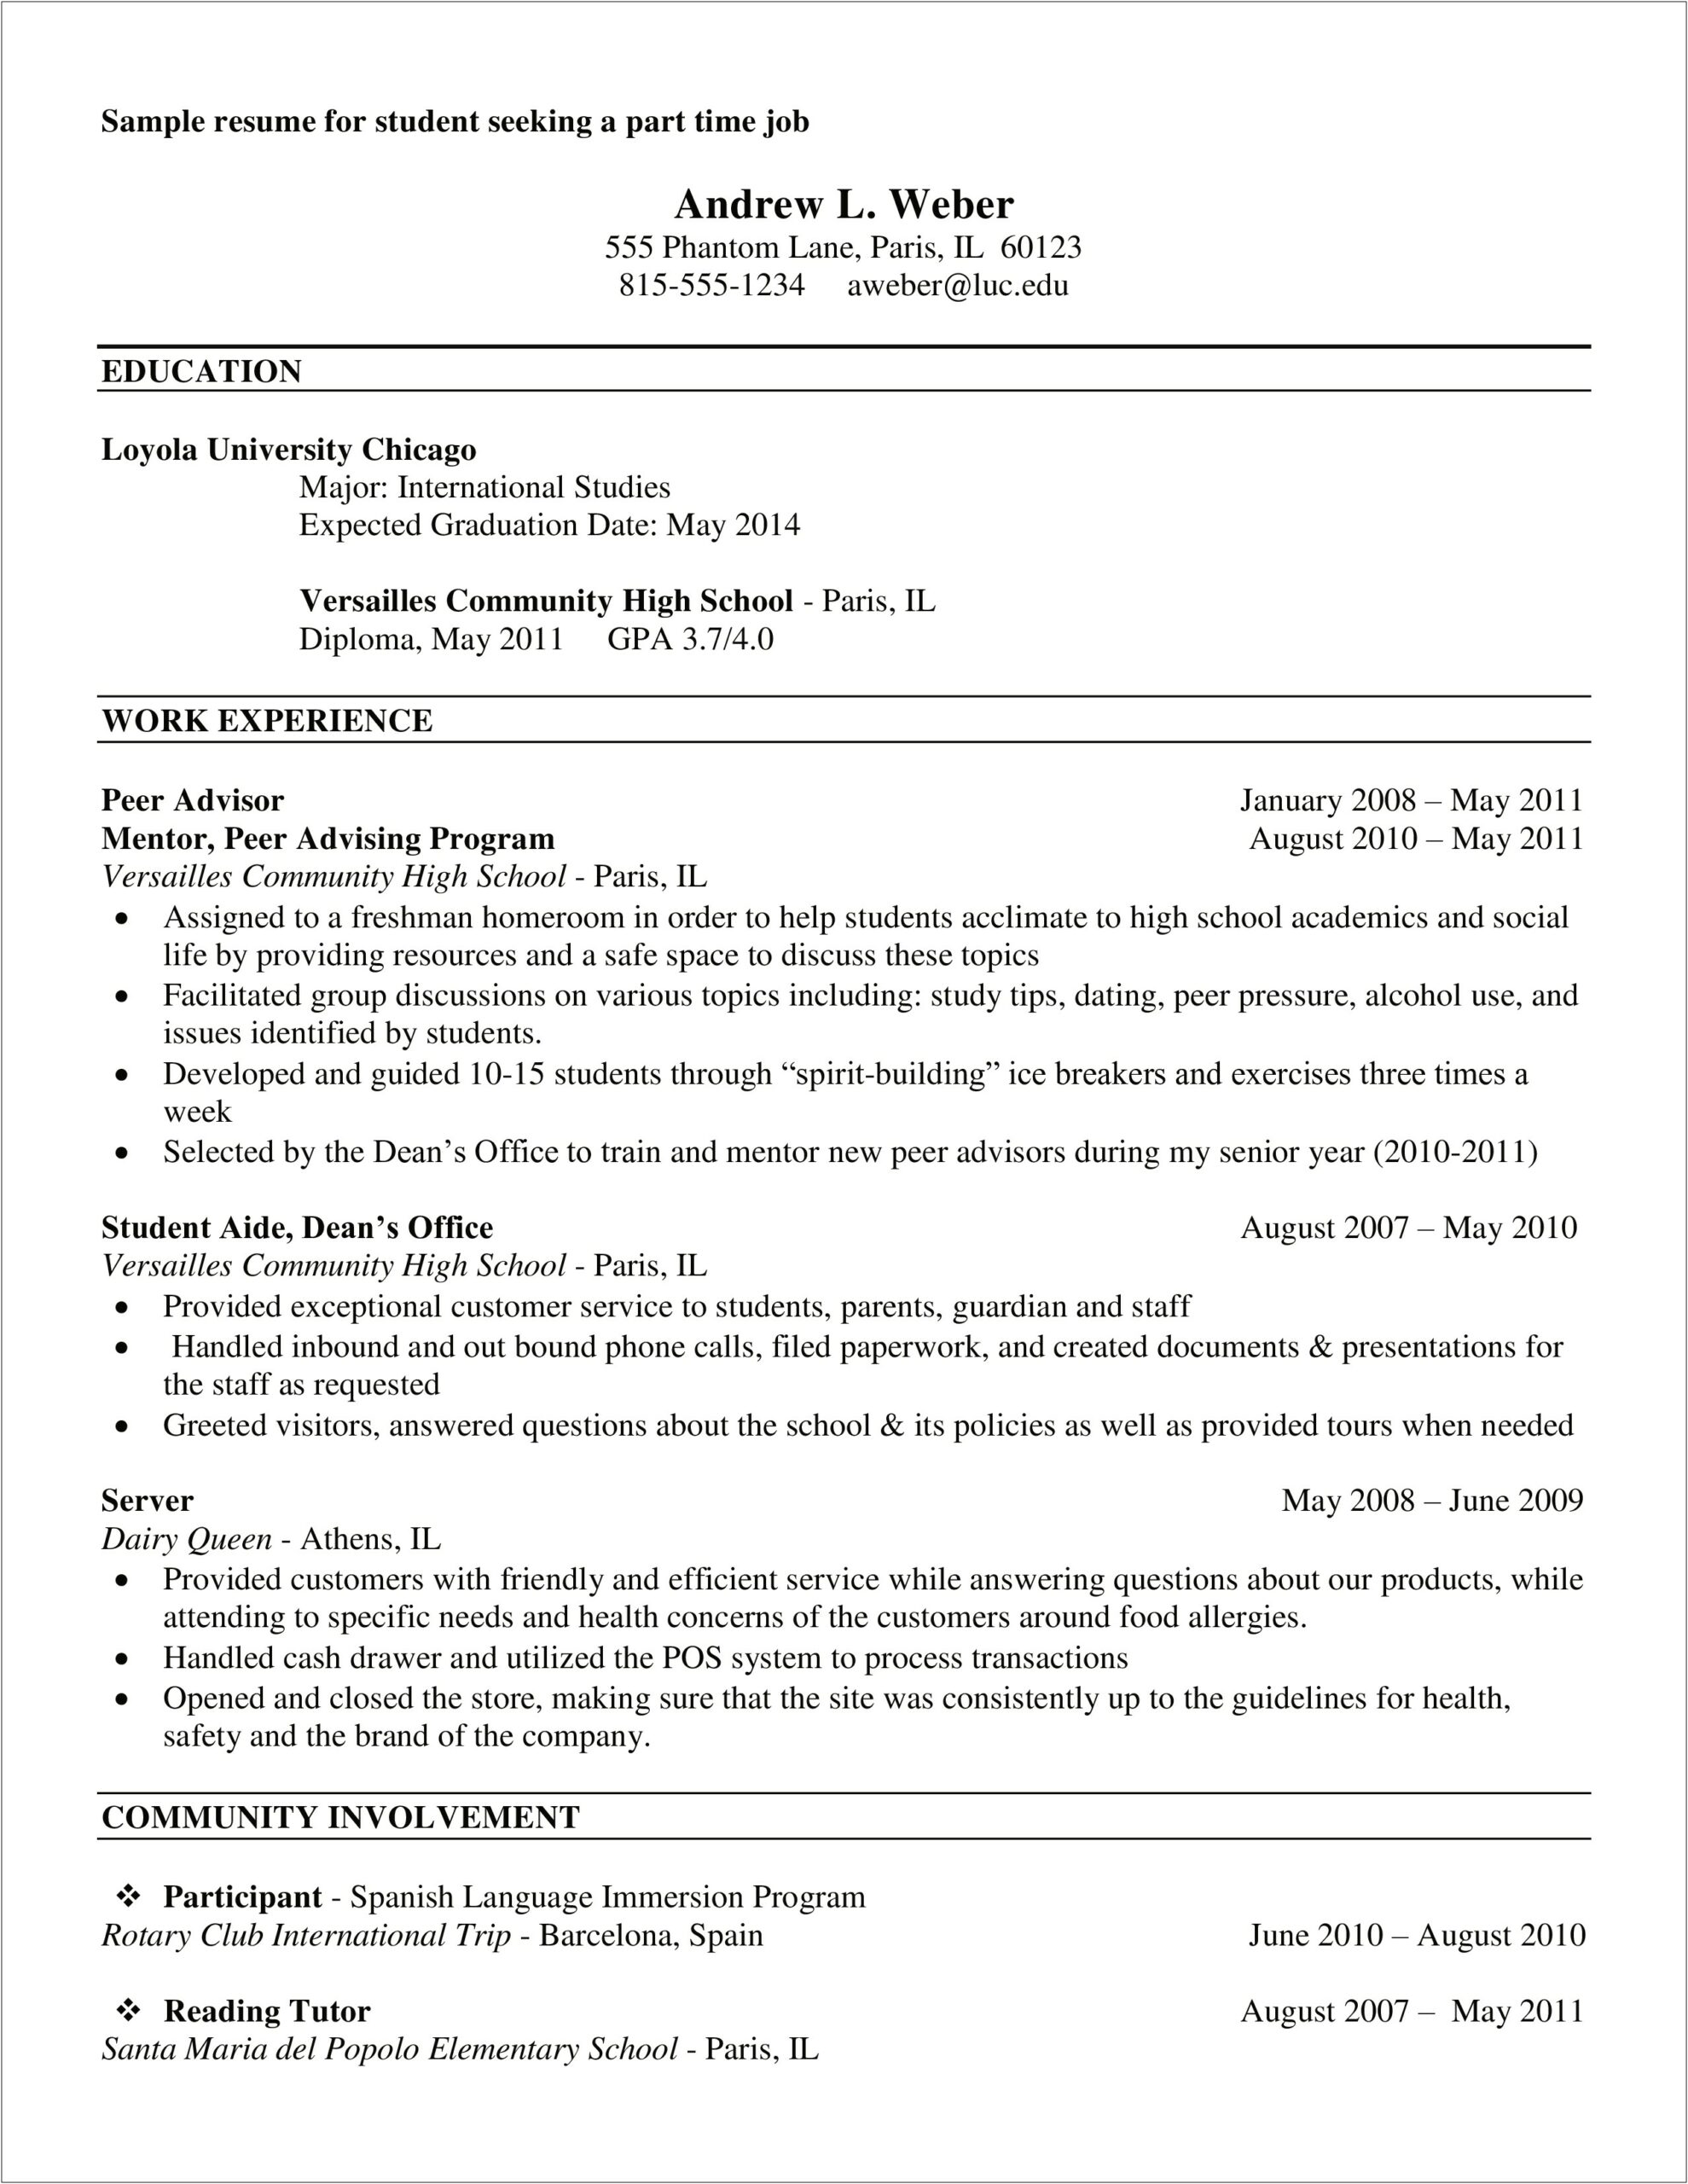 Resume With Part Time Job